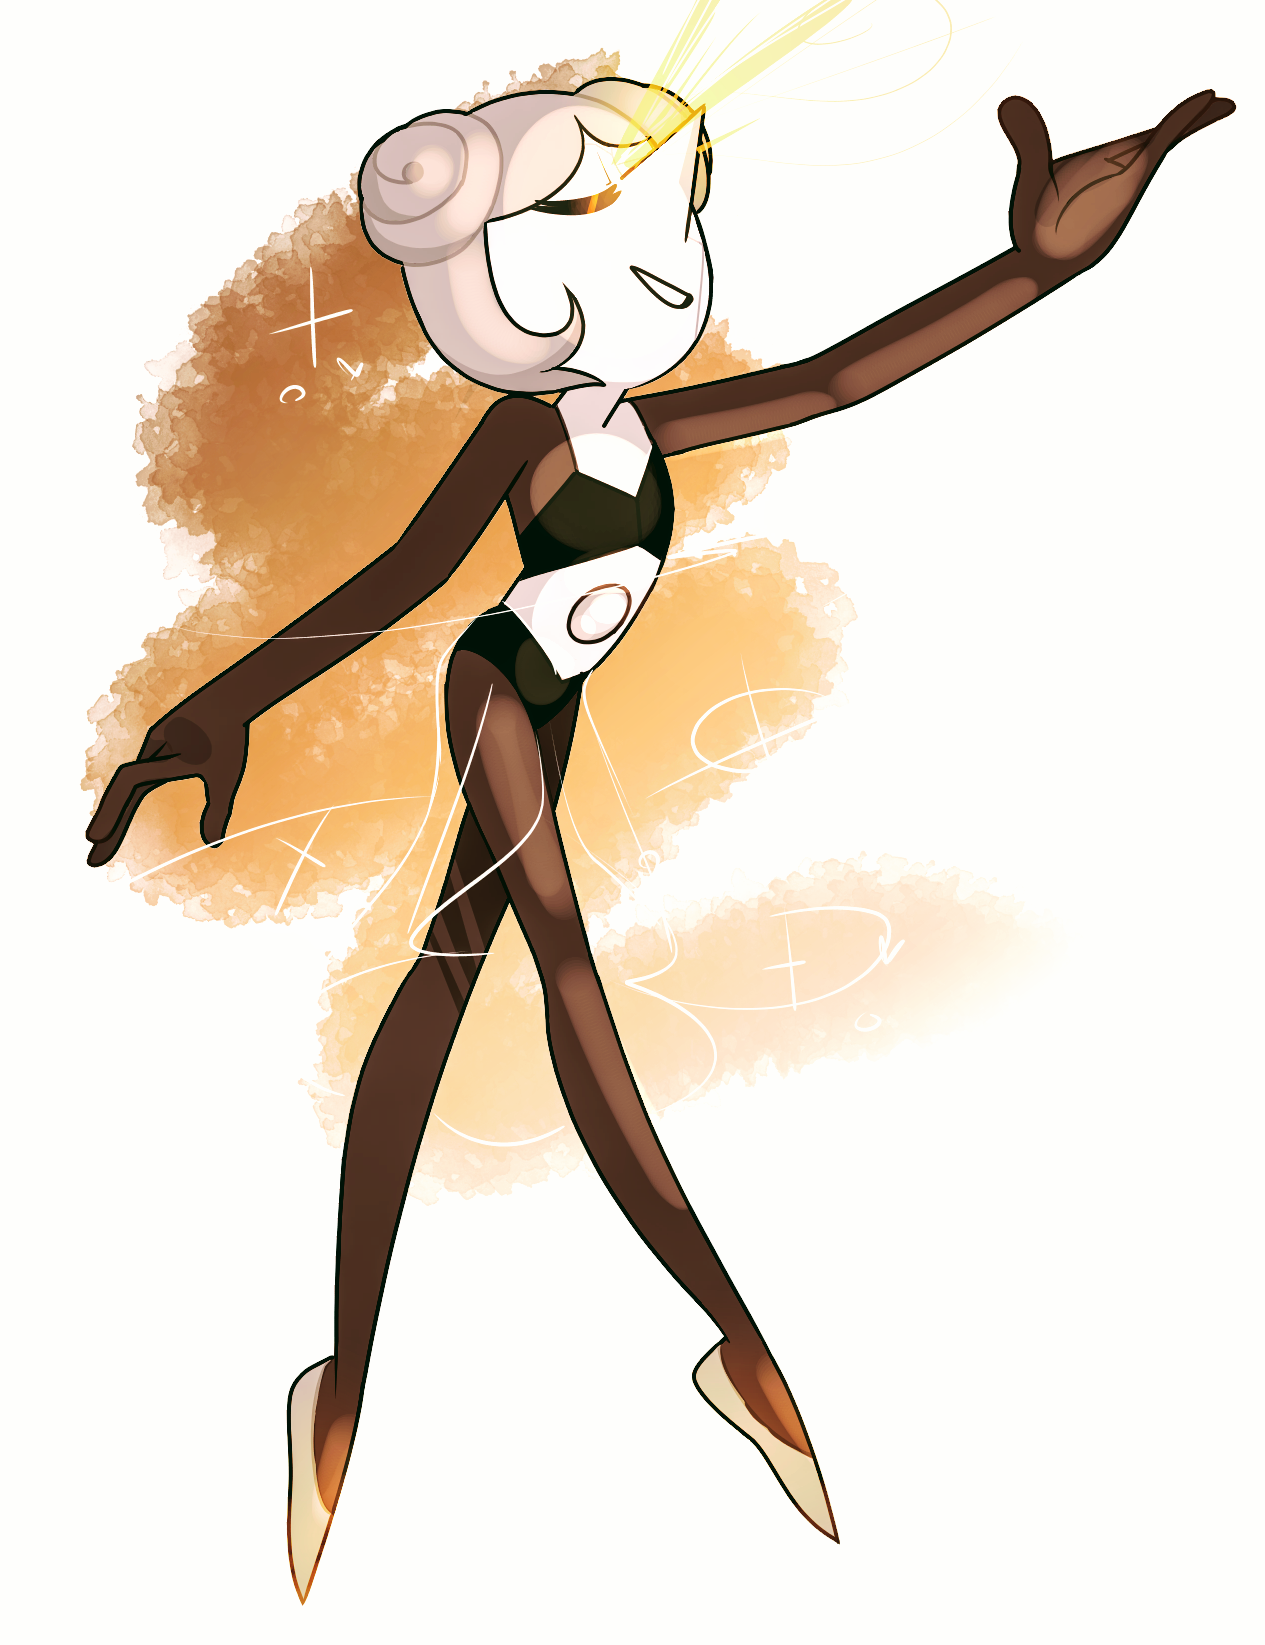 Her pose was a little plain for such a grand diamond I had to this~